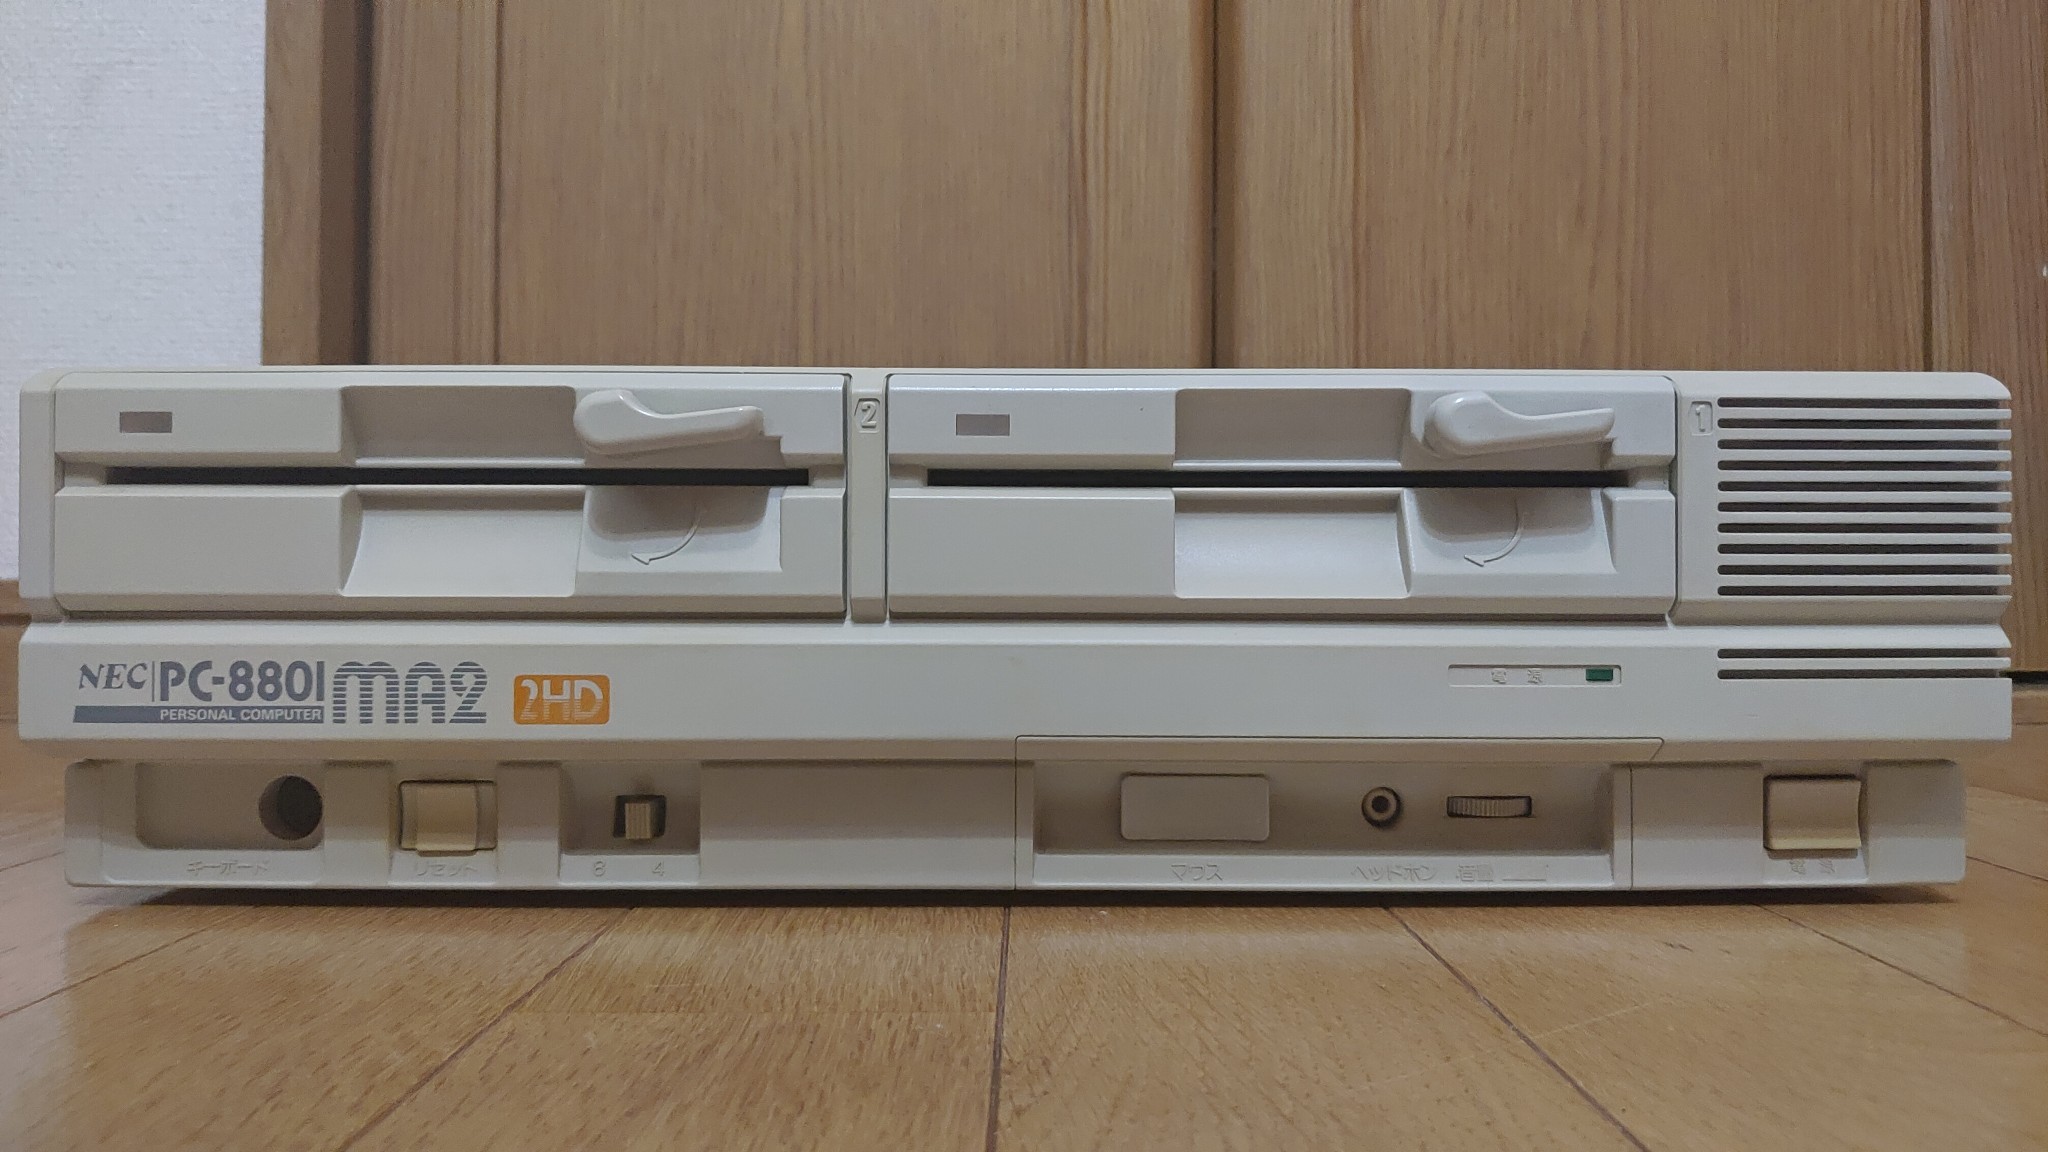 NEC PC-8801MA2 – Japanese Vintage Computer Collection